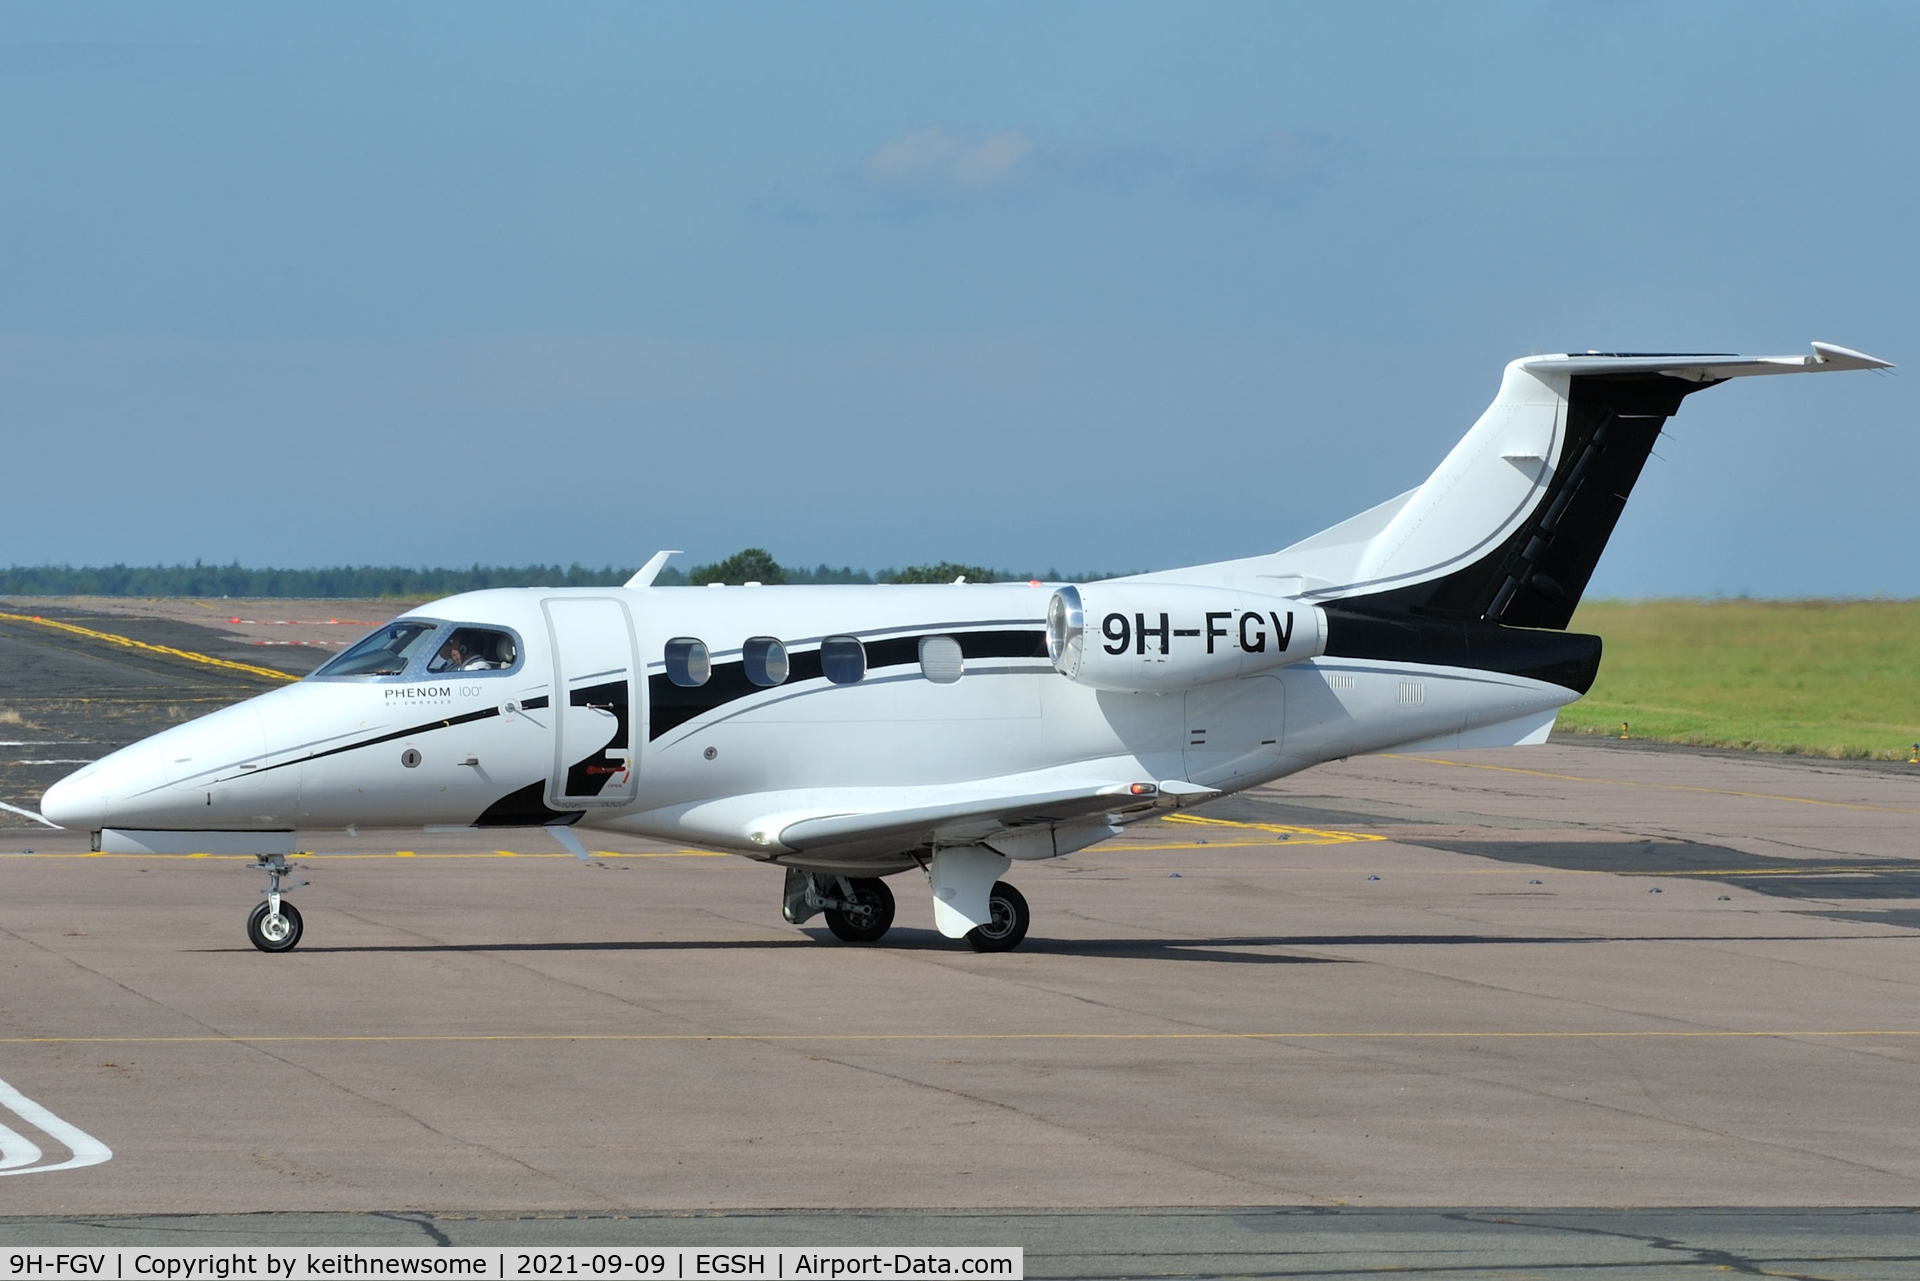 9H-FGV, 2010 Embraer EMB-500 Phenom 100 C/N 50000193, Arriving at Norwich from Biggin Hill.